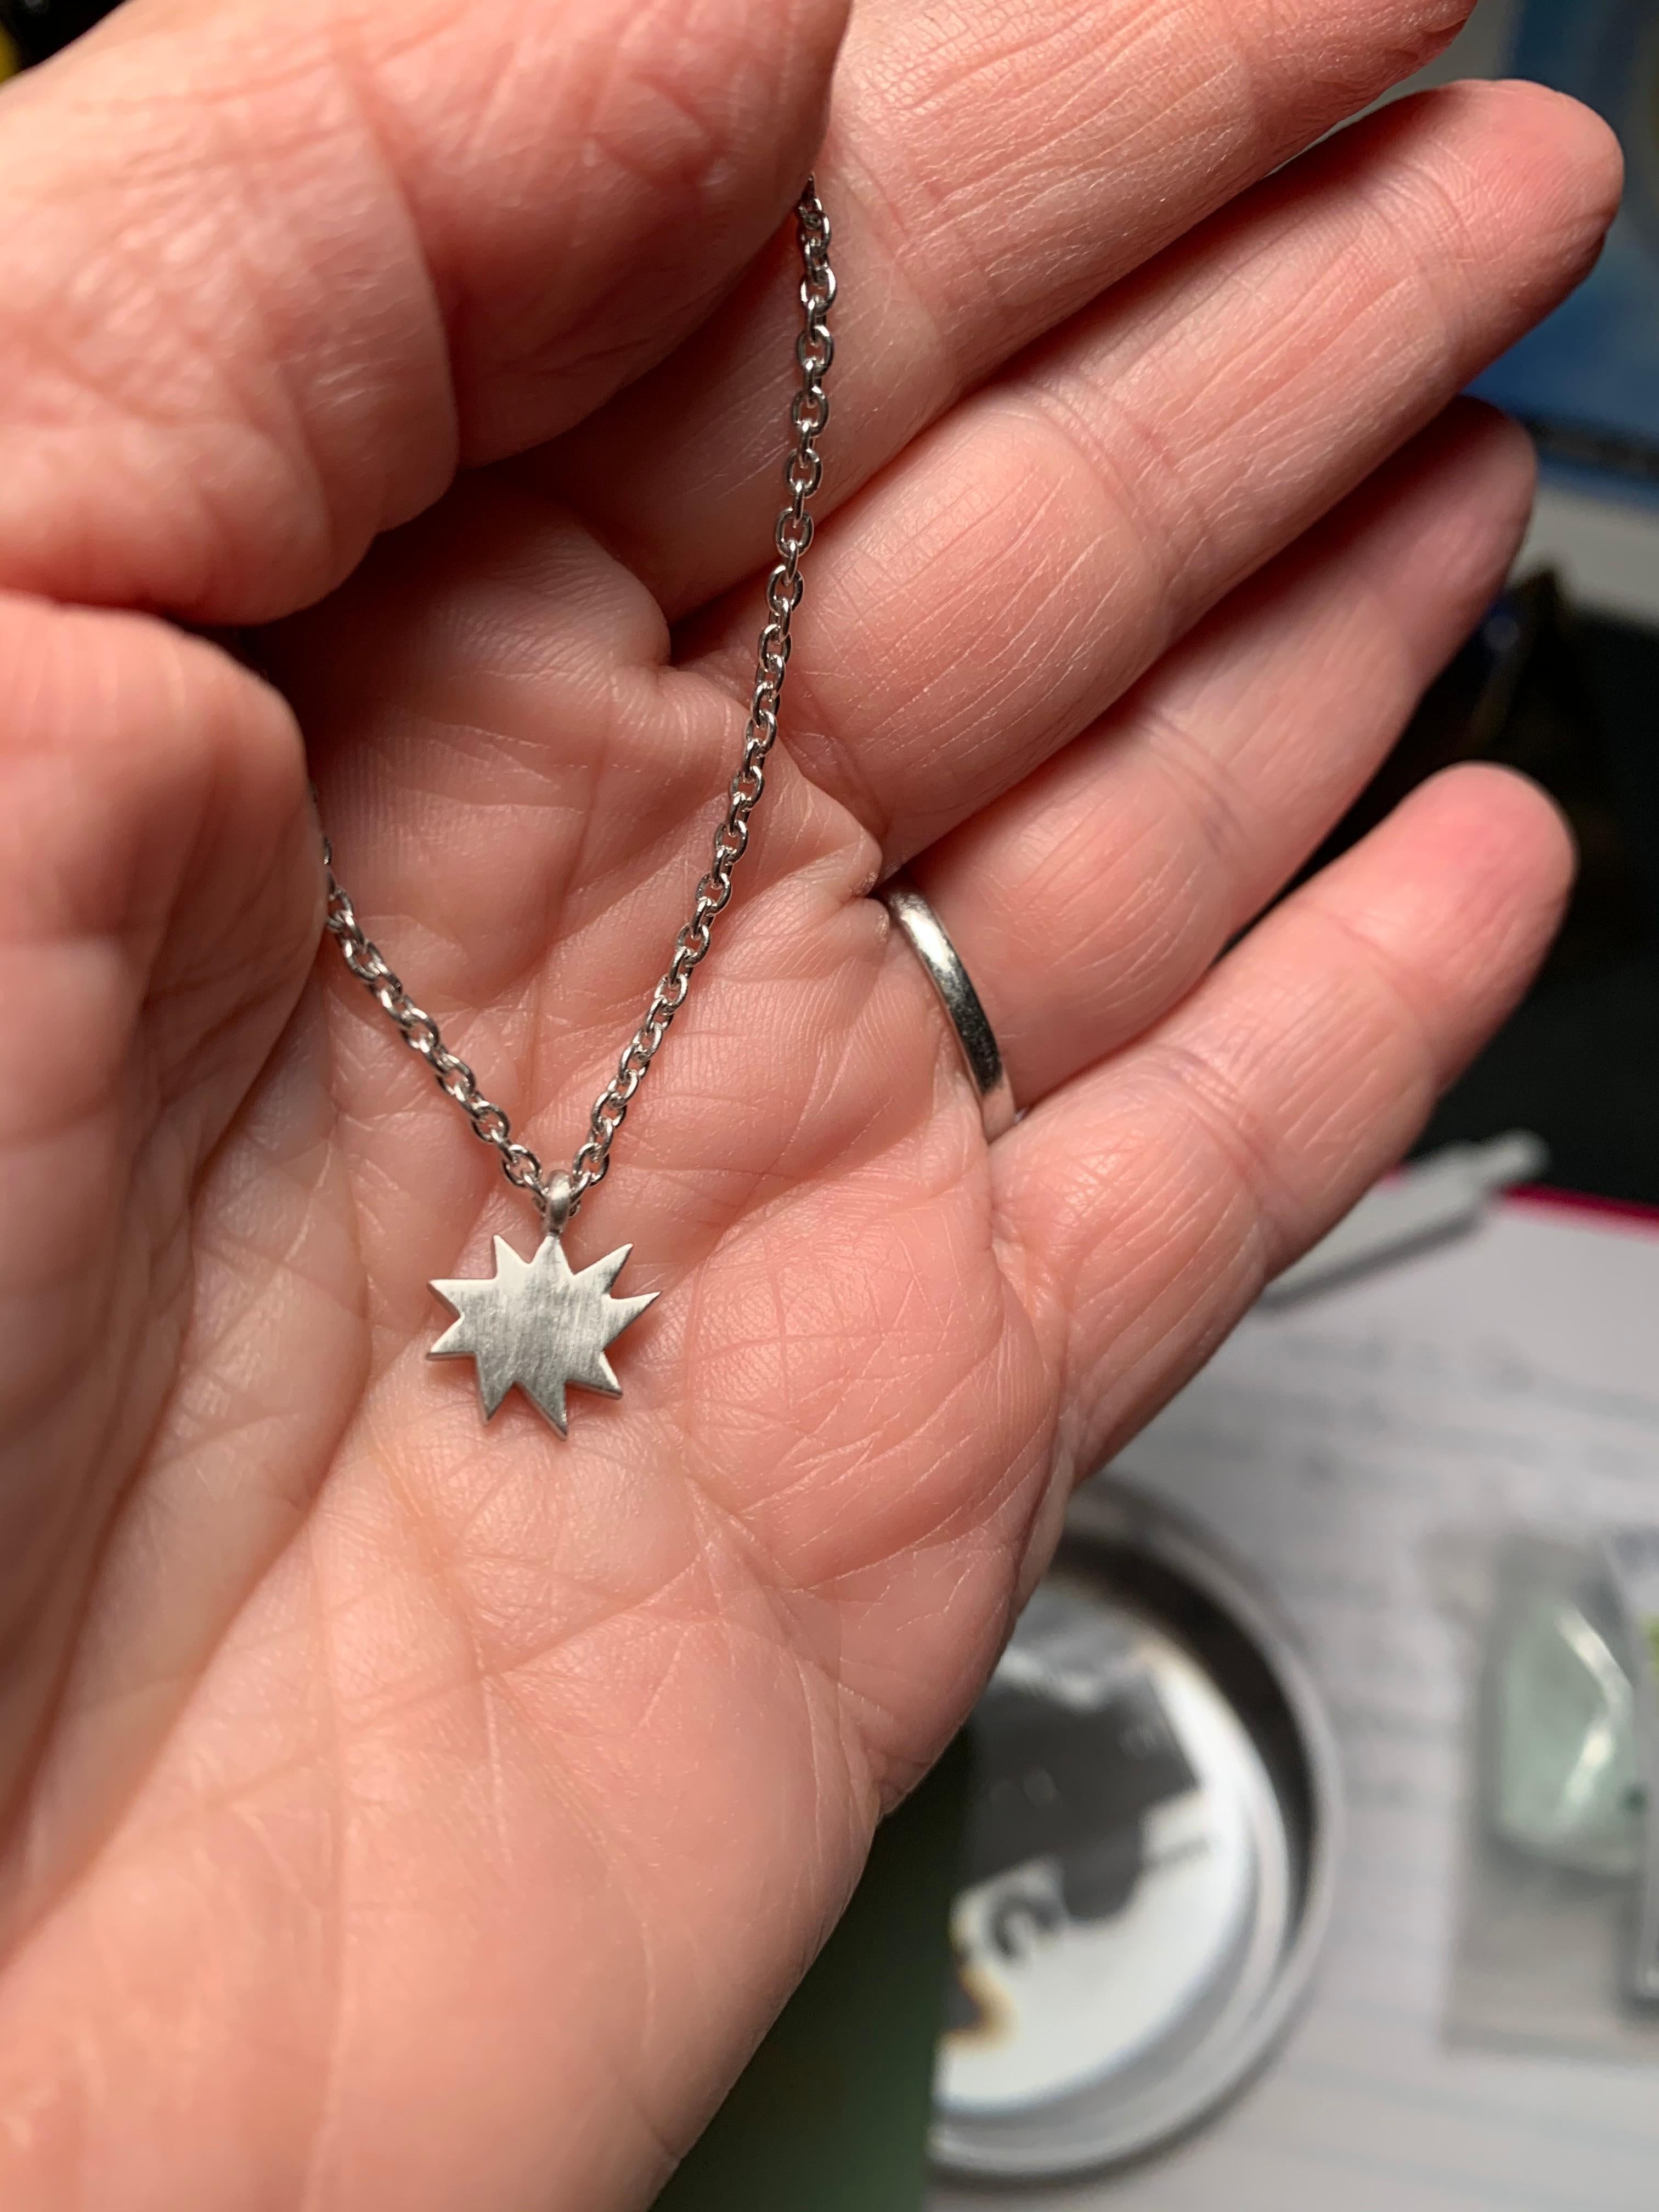 Elegant and adorable! Our Mini Stella Necklace is the perfect piece to layer or wear alone. Our iconic organic star in a new delicate size hangs on a sterling silver chain and brings some KAPOW! to all who wear it. Wear one or several!

KAPOW! The